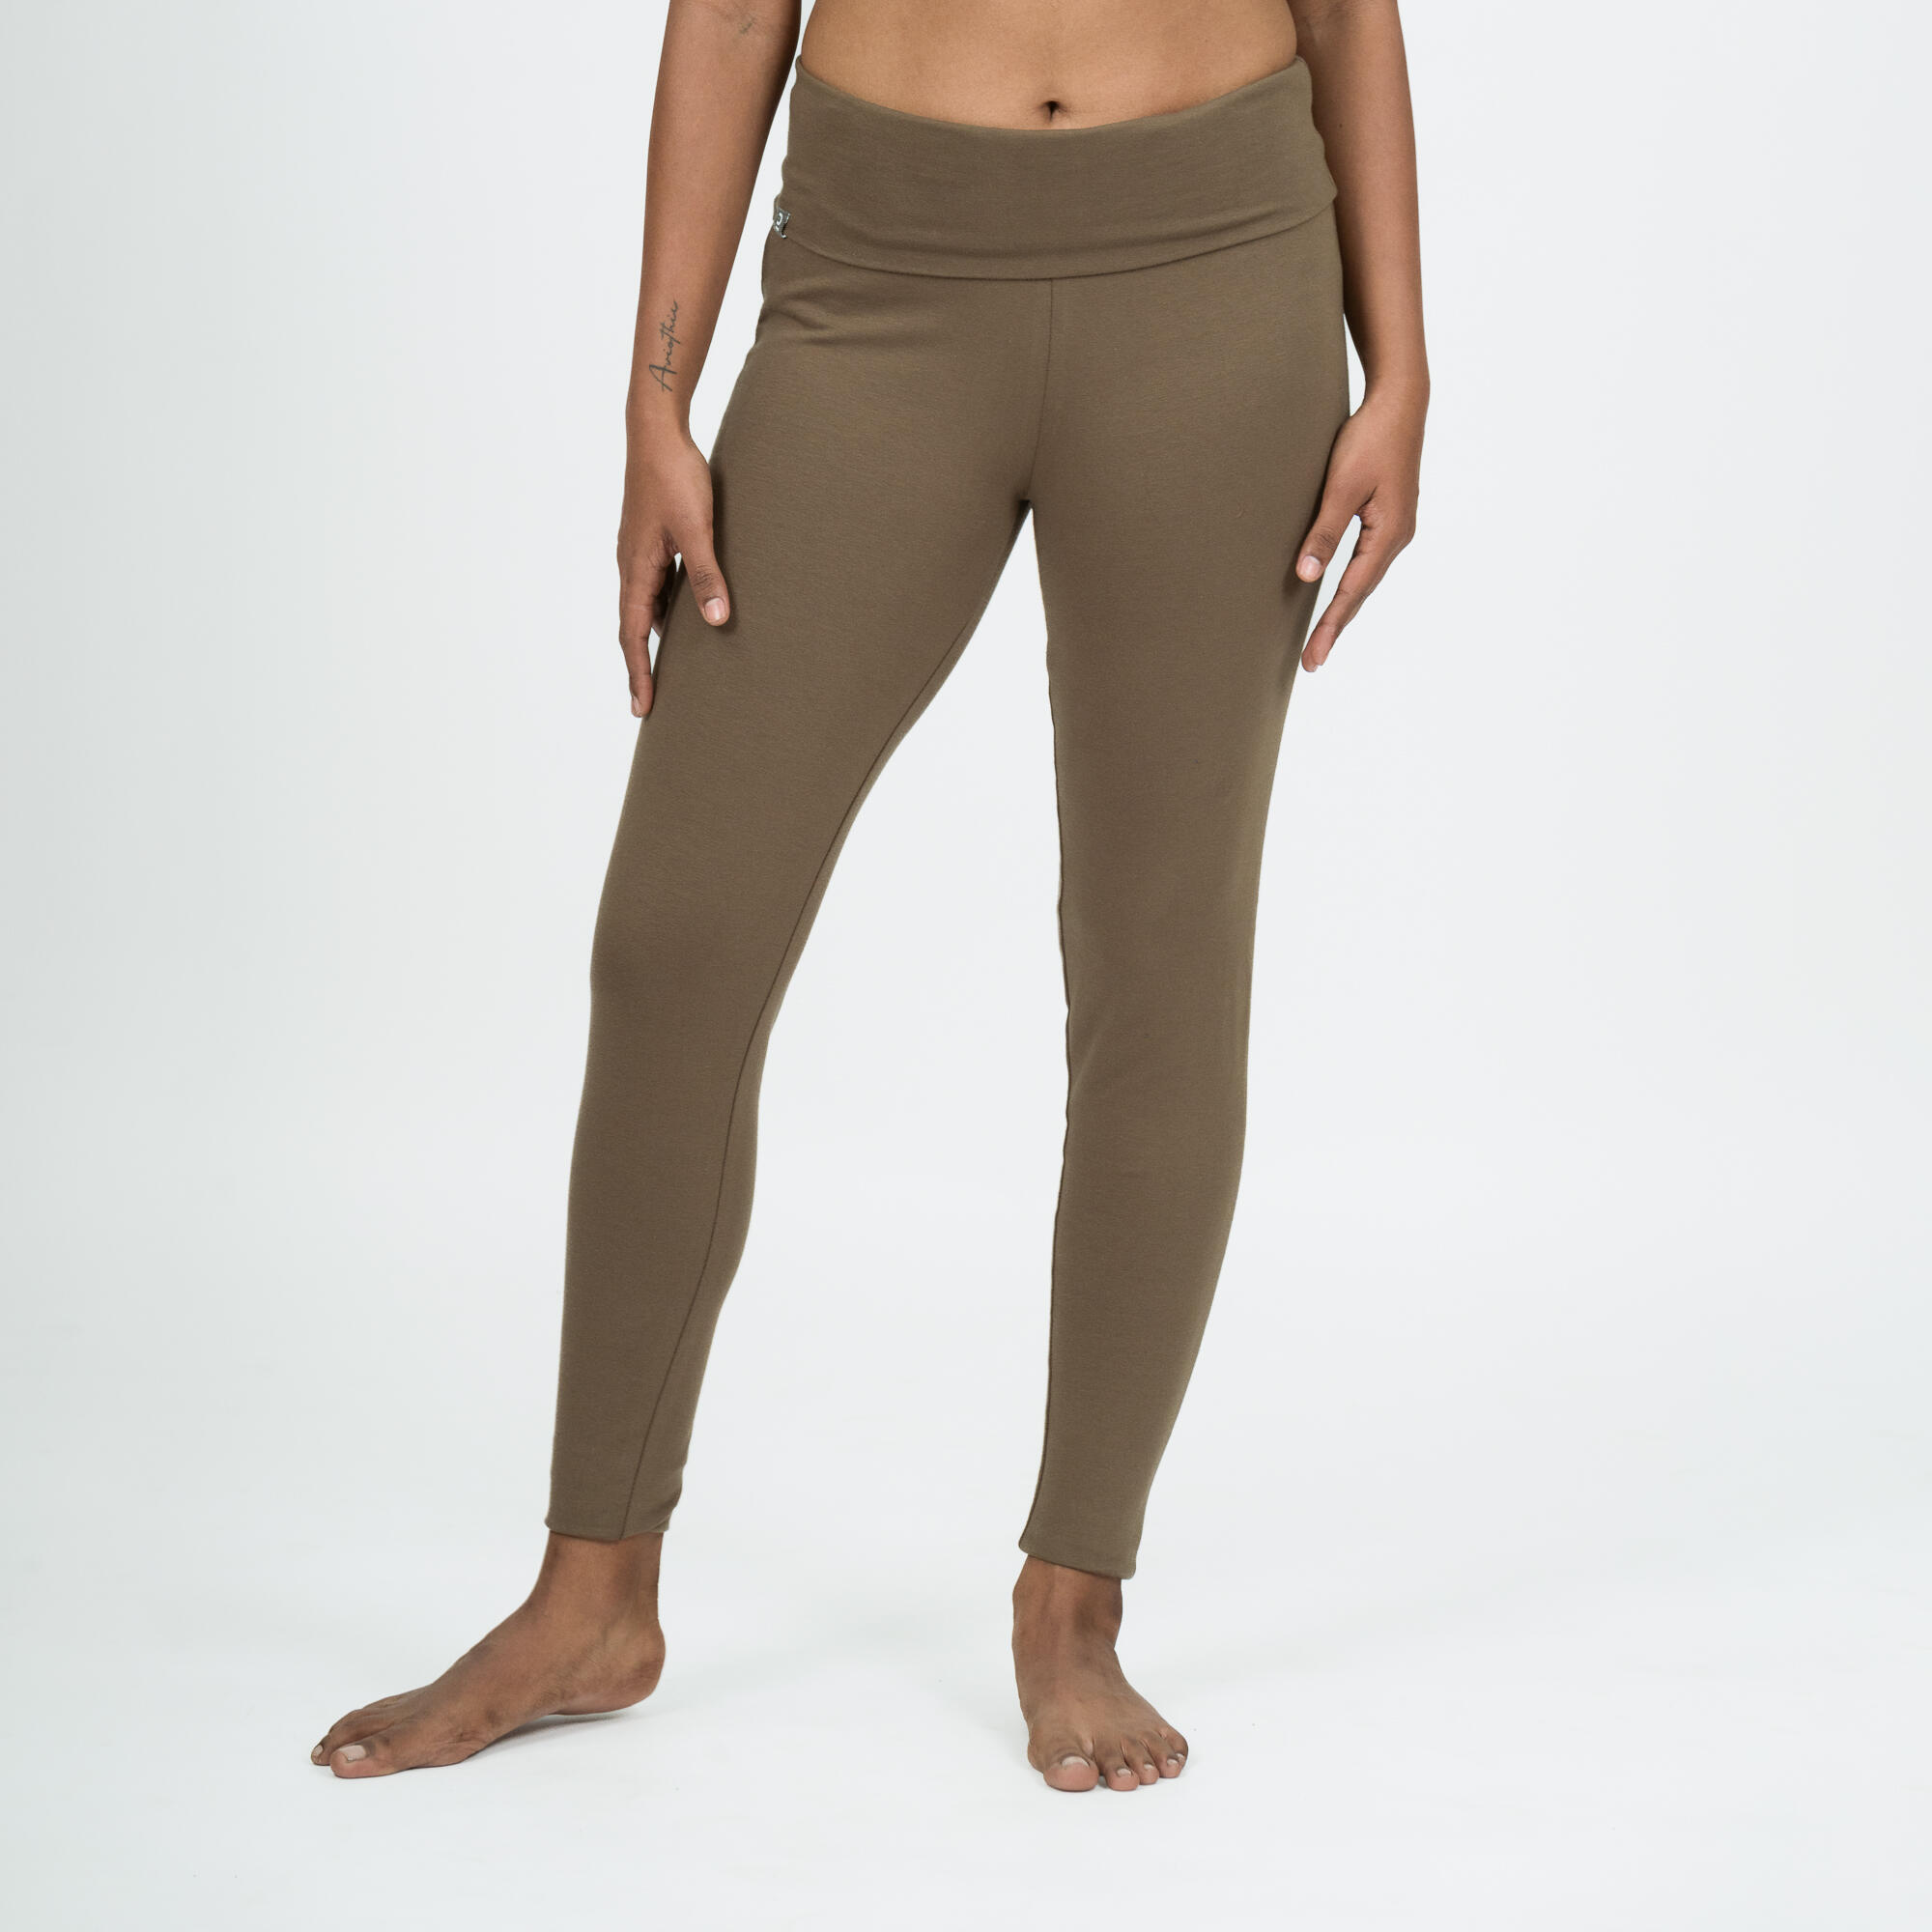 Where can I get the best women's activewear online? - Quora